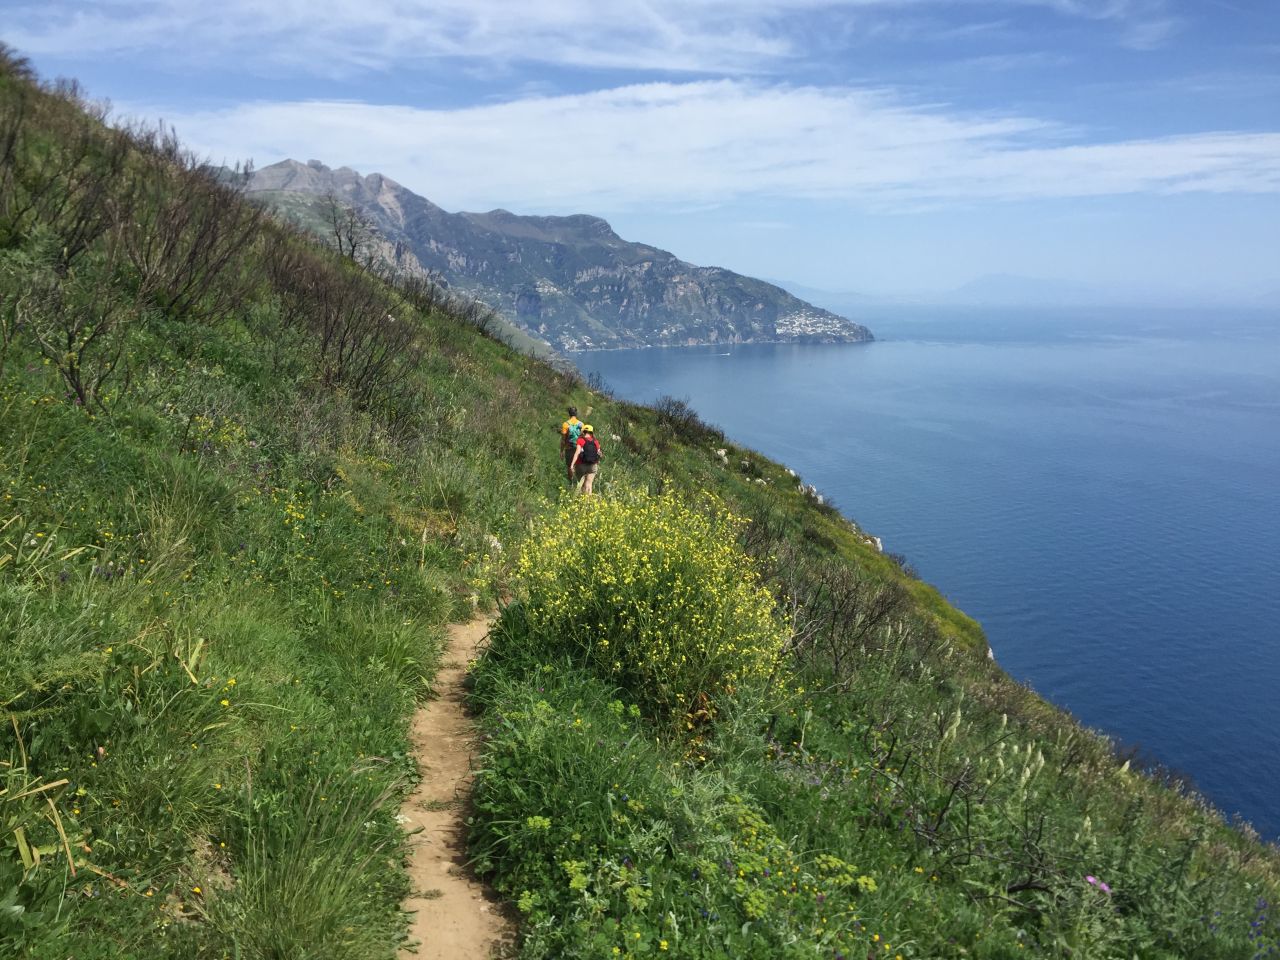 <strong>On the trail: </strong>Hikers, birdwatchers and myth-hunters can walk the Sirens' Trail, looking for clues and soaking in the mythical landscape overlooking the dazzling Mediterranean Sea.